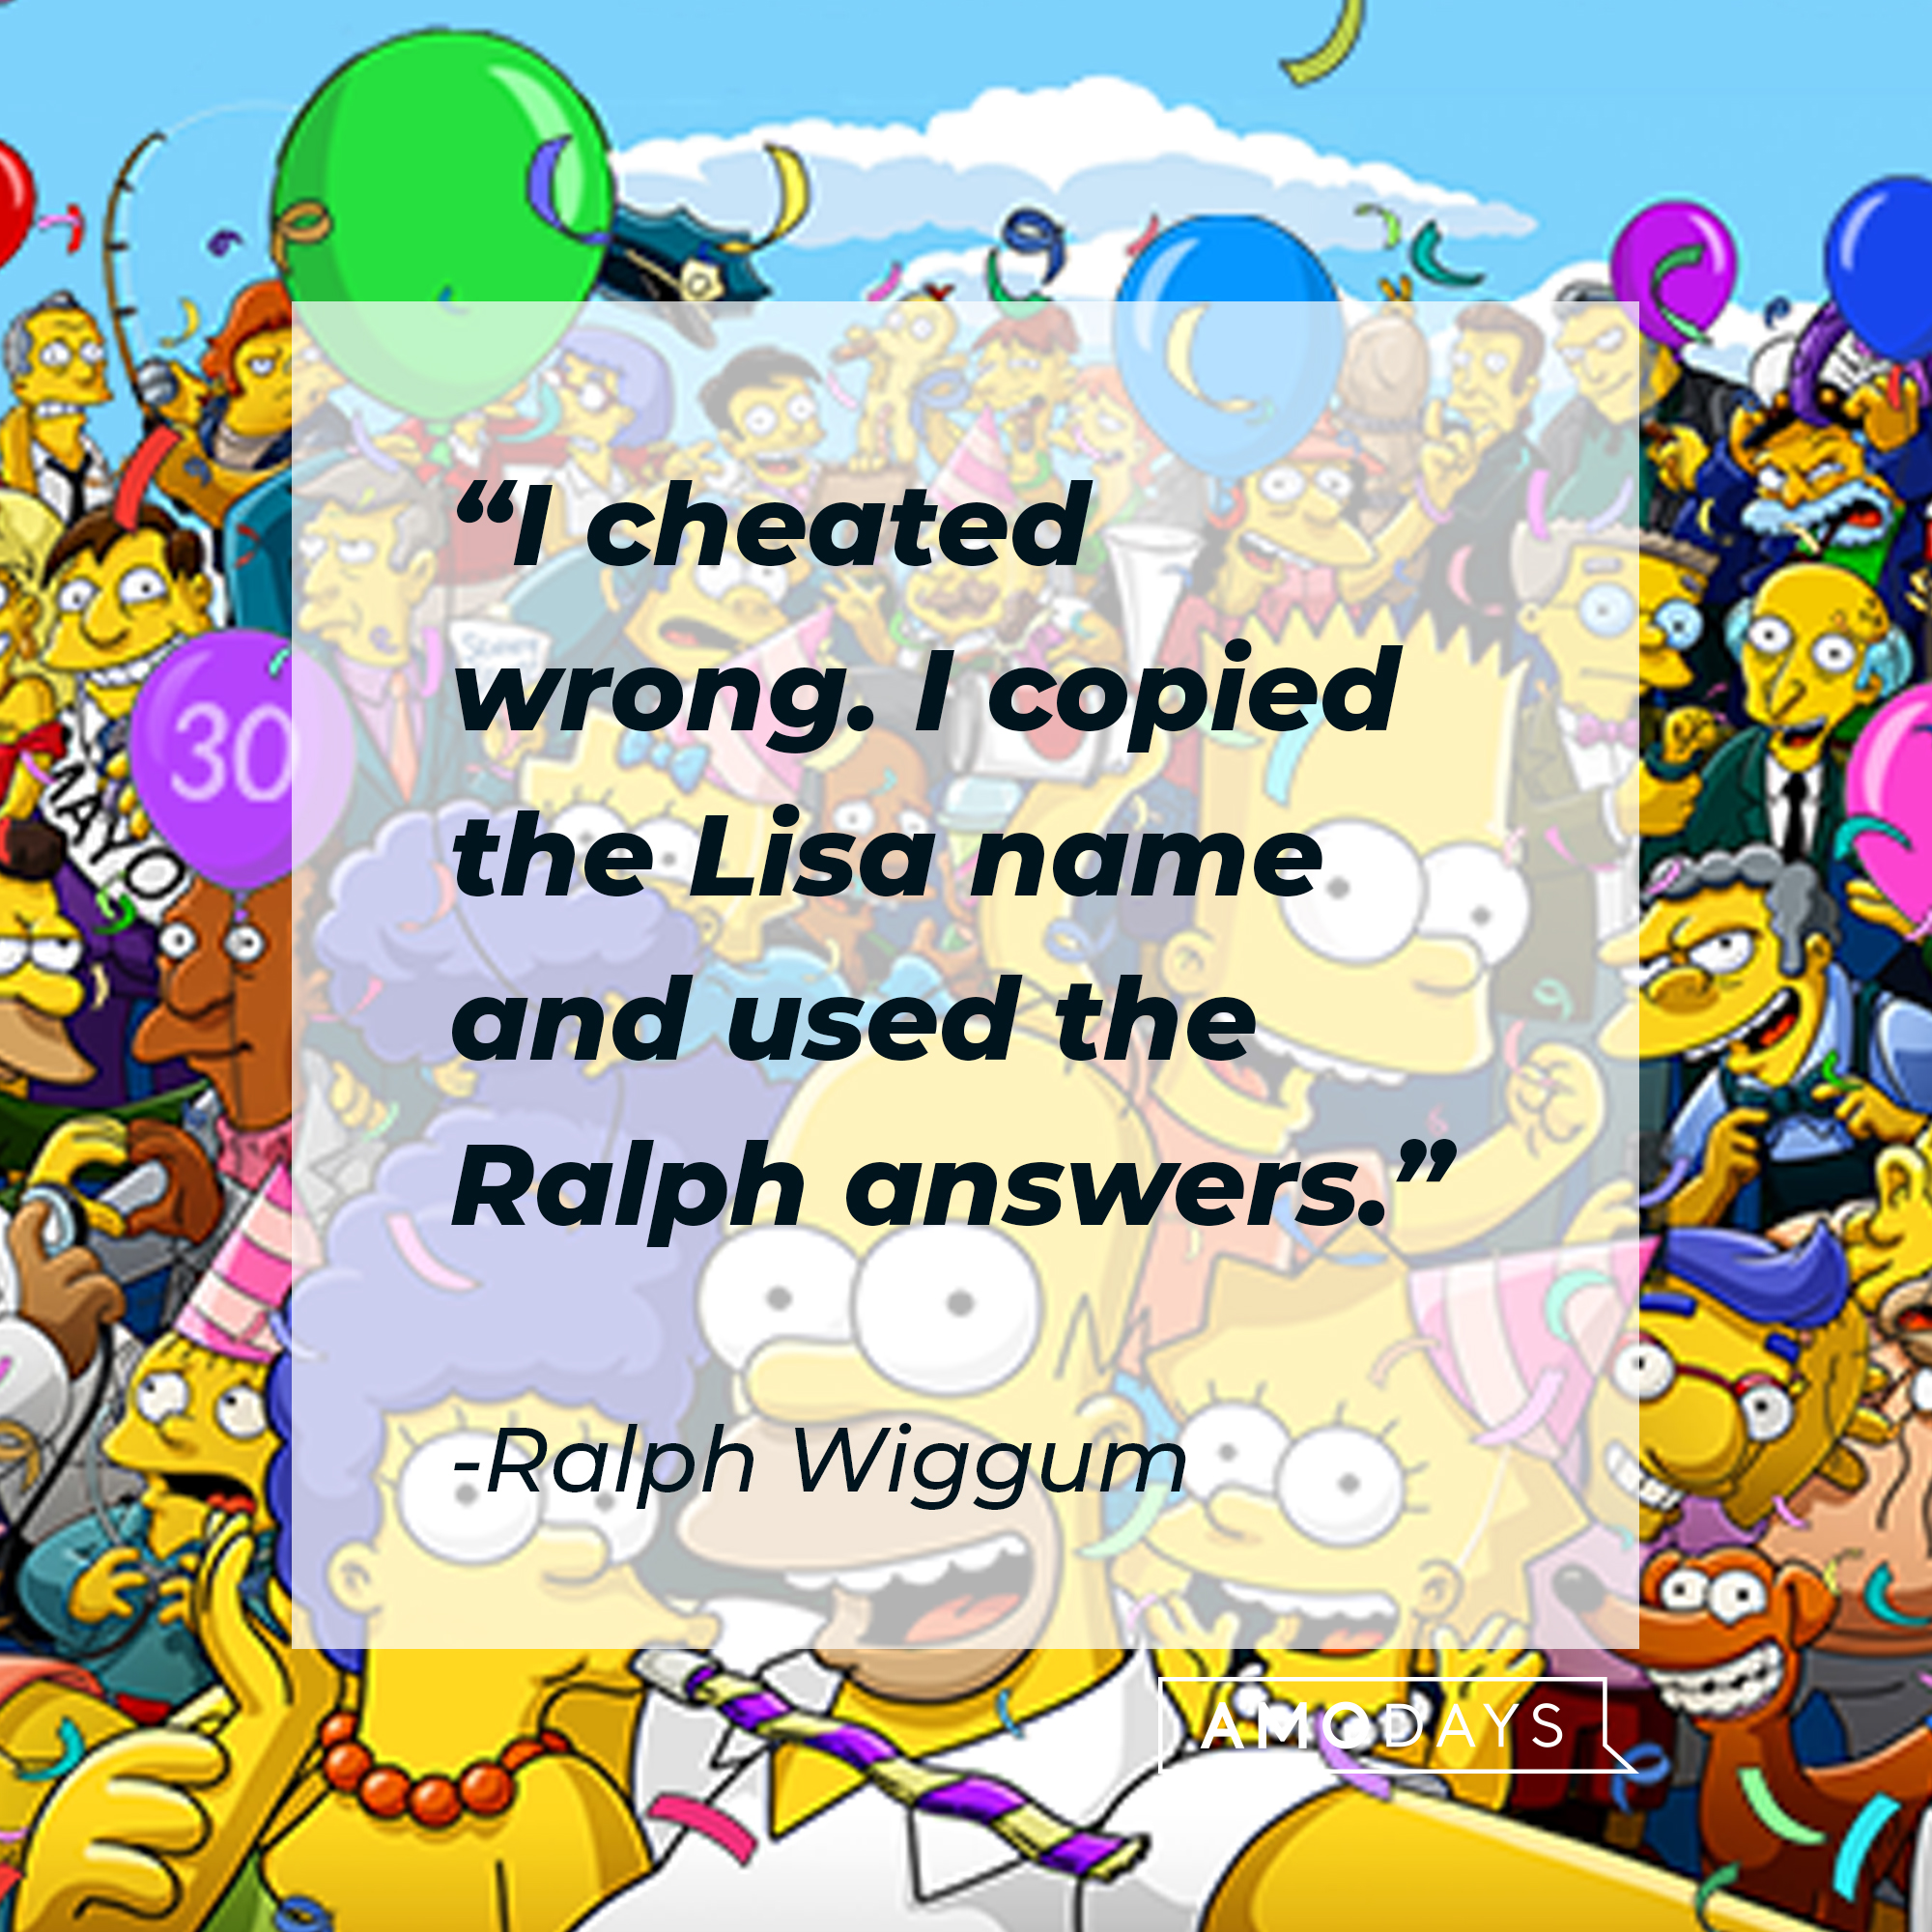 Ralph Wiggum's quote: "I cheated wrong. I copied the Lisa name and used the Ralph answers." | Source: facebook.com/TheSimpsons